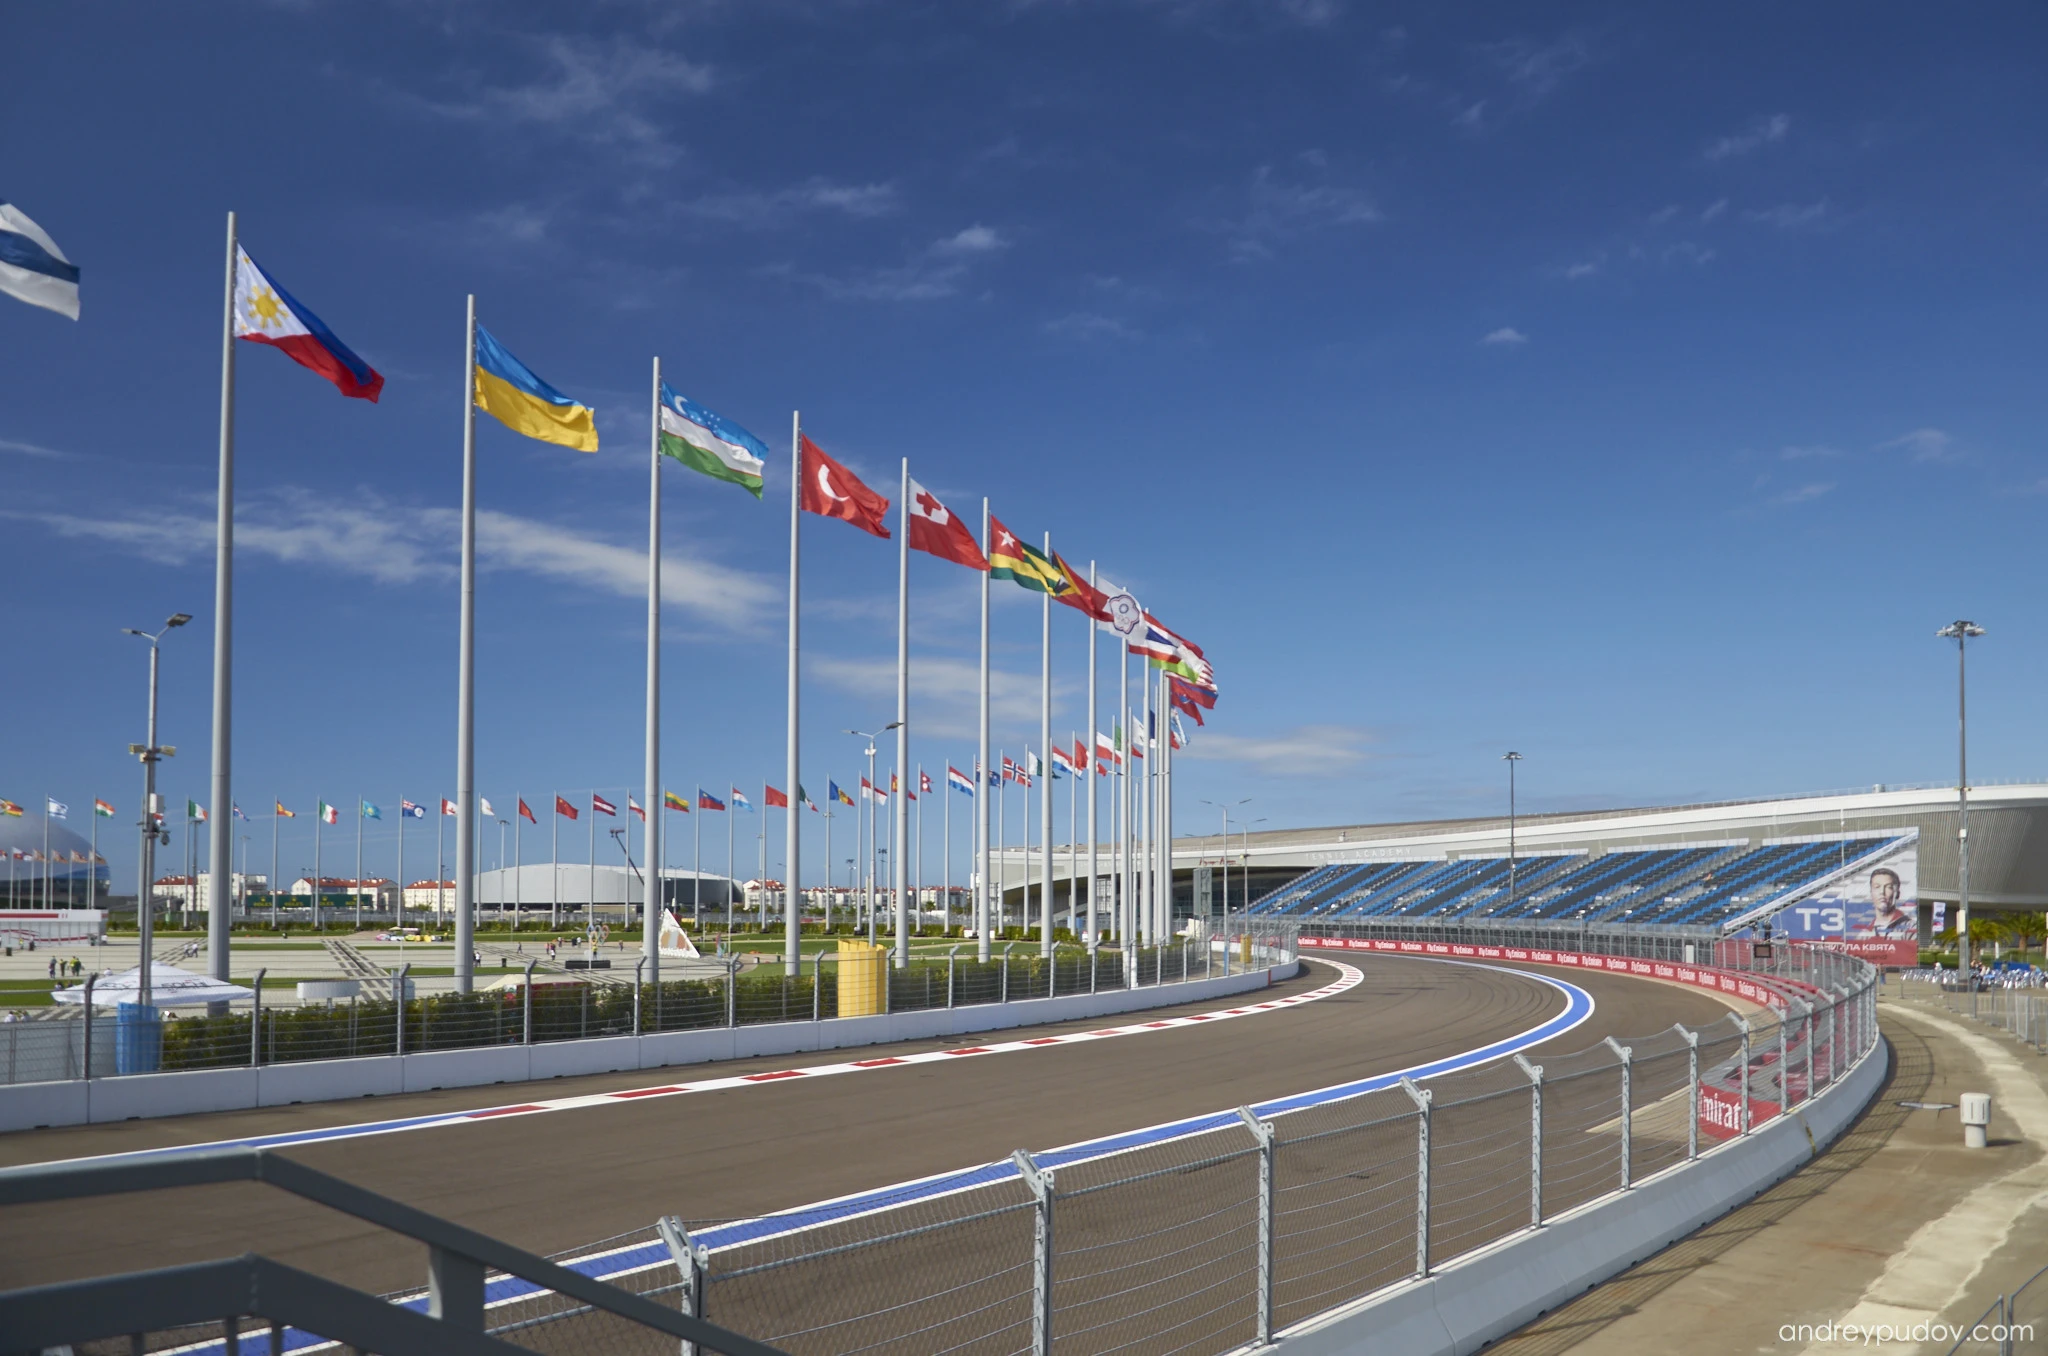 The circuit is similar to the Beijing Olympic Green Circuit and the Sydney Olympic Park Circuit in that it runs around a former Olympic complex; in this case, the Sochi Olympic Park site, scene of the 2014 Winter Olympic Games. The inaugural World Championship Russian Grand Prix took place in 2014, beginning a seven-year contract.

Also, the TCR International Series raced at Sochi in 2015-2016, with the TCR Russian Series and SMP F4 Championship as support series.